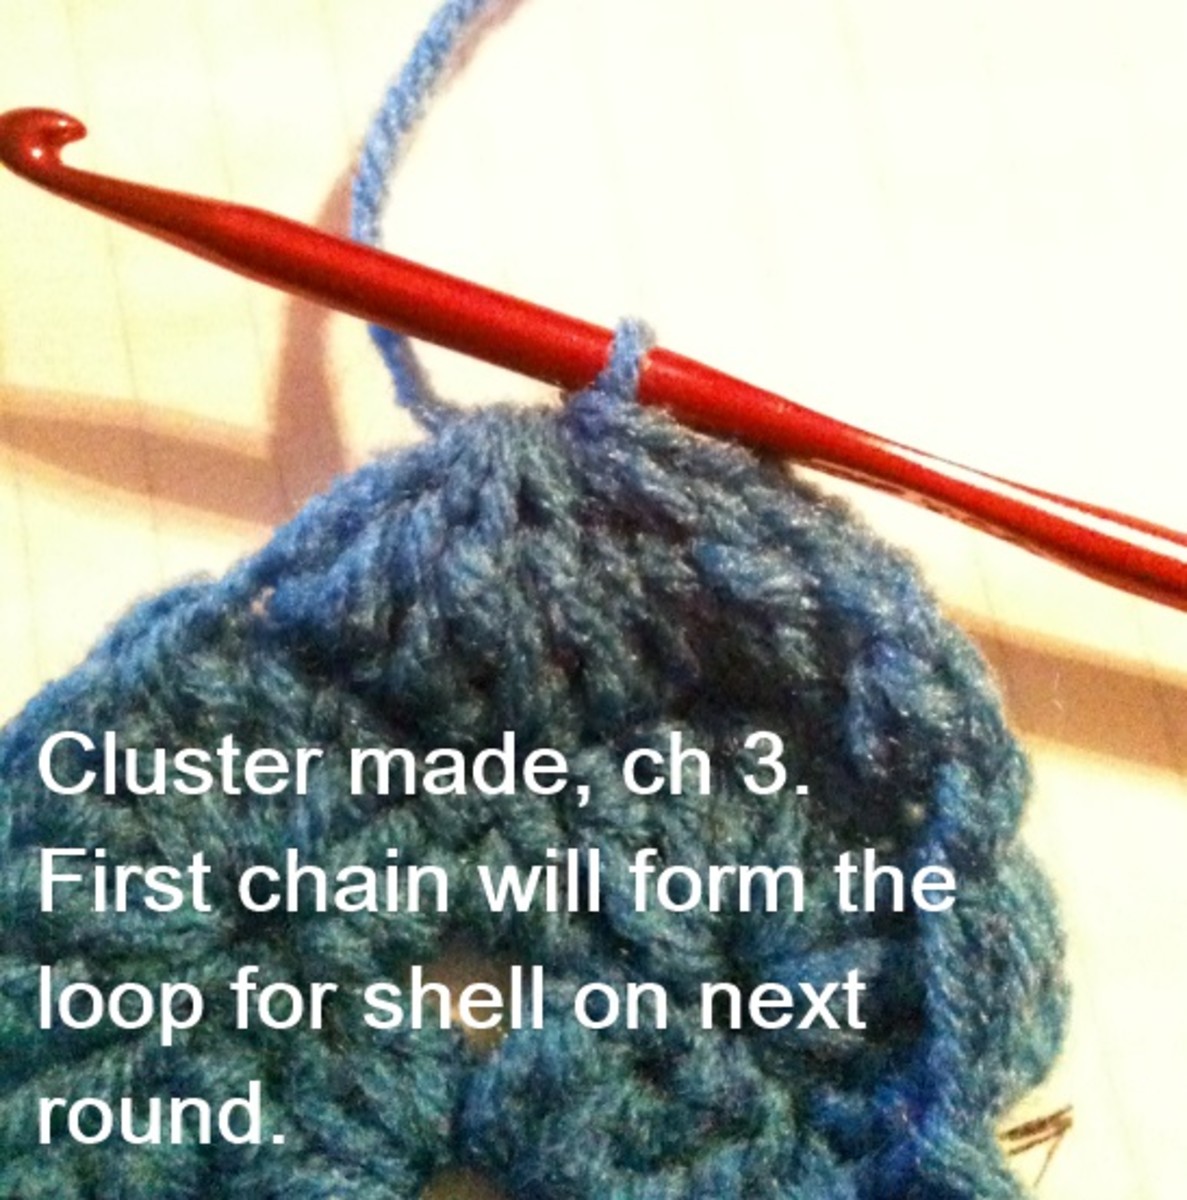 to form the cluster. The next ch will be the closing loop as talked about in the pattern.